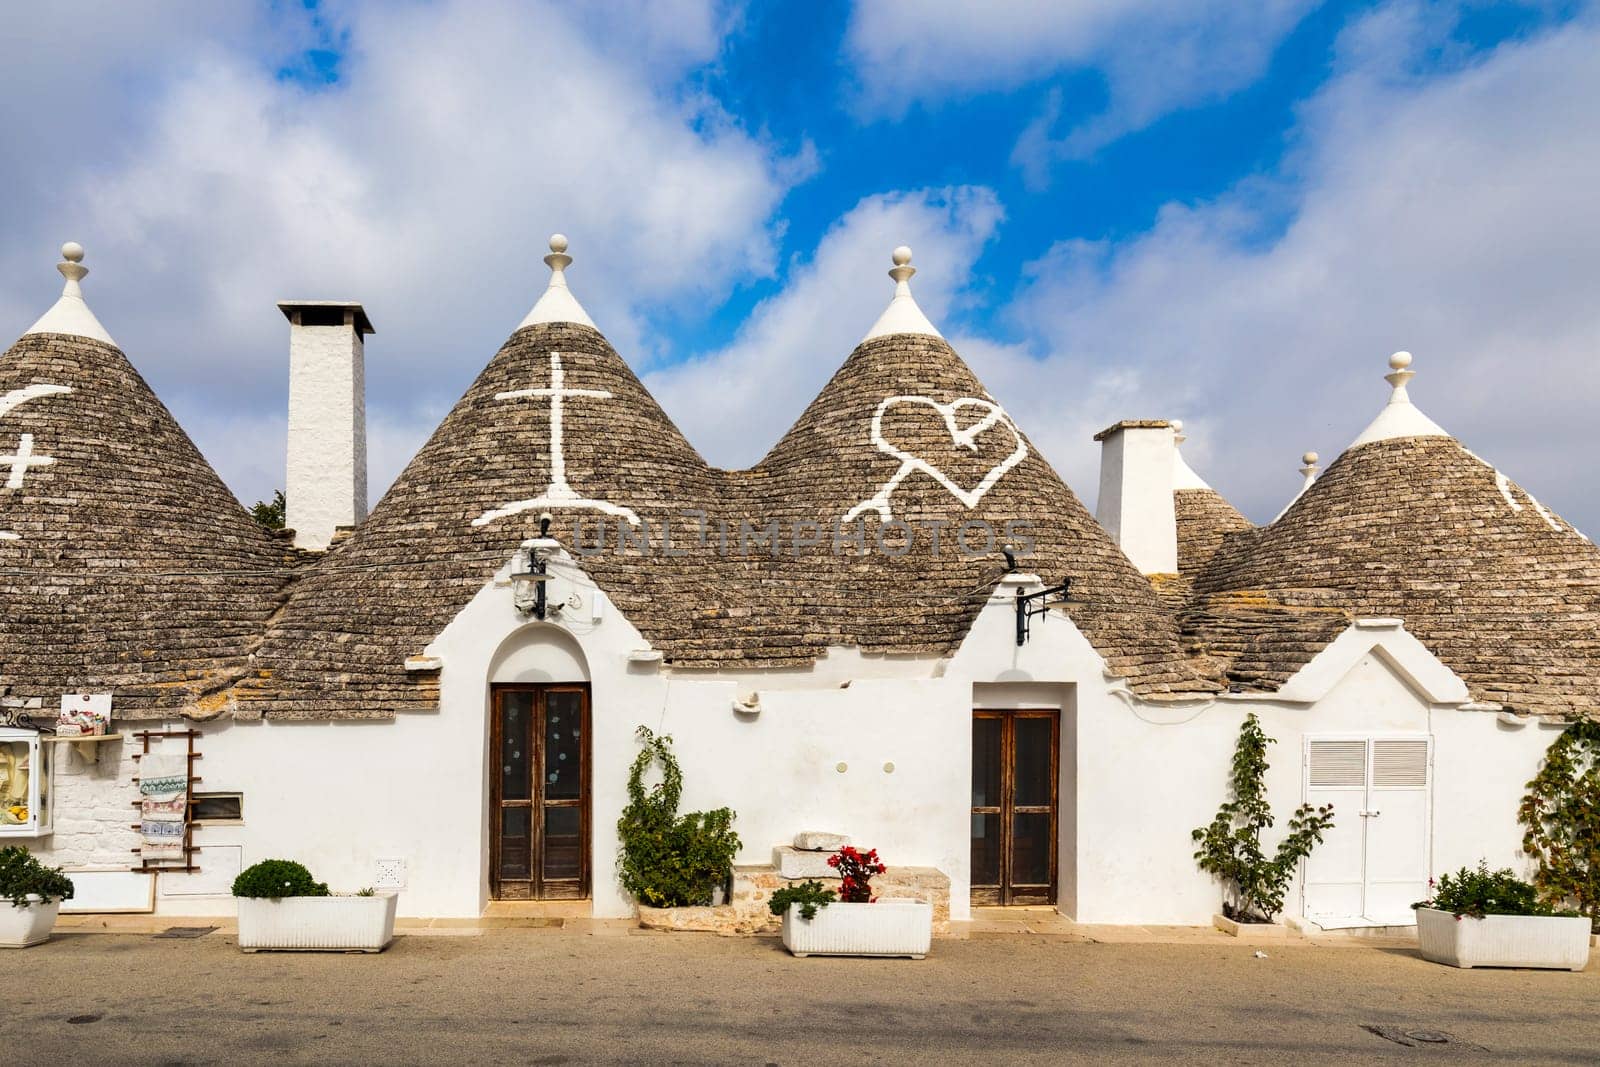 The traditional Trulli houses in Alberobello city, Apulia, Italy. Cityscape over the traditional roofs of the Trulli, original and old houses of this region, Apulia, Alberobello, Puglia, Italy.  by DaLiu